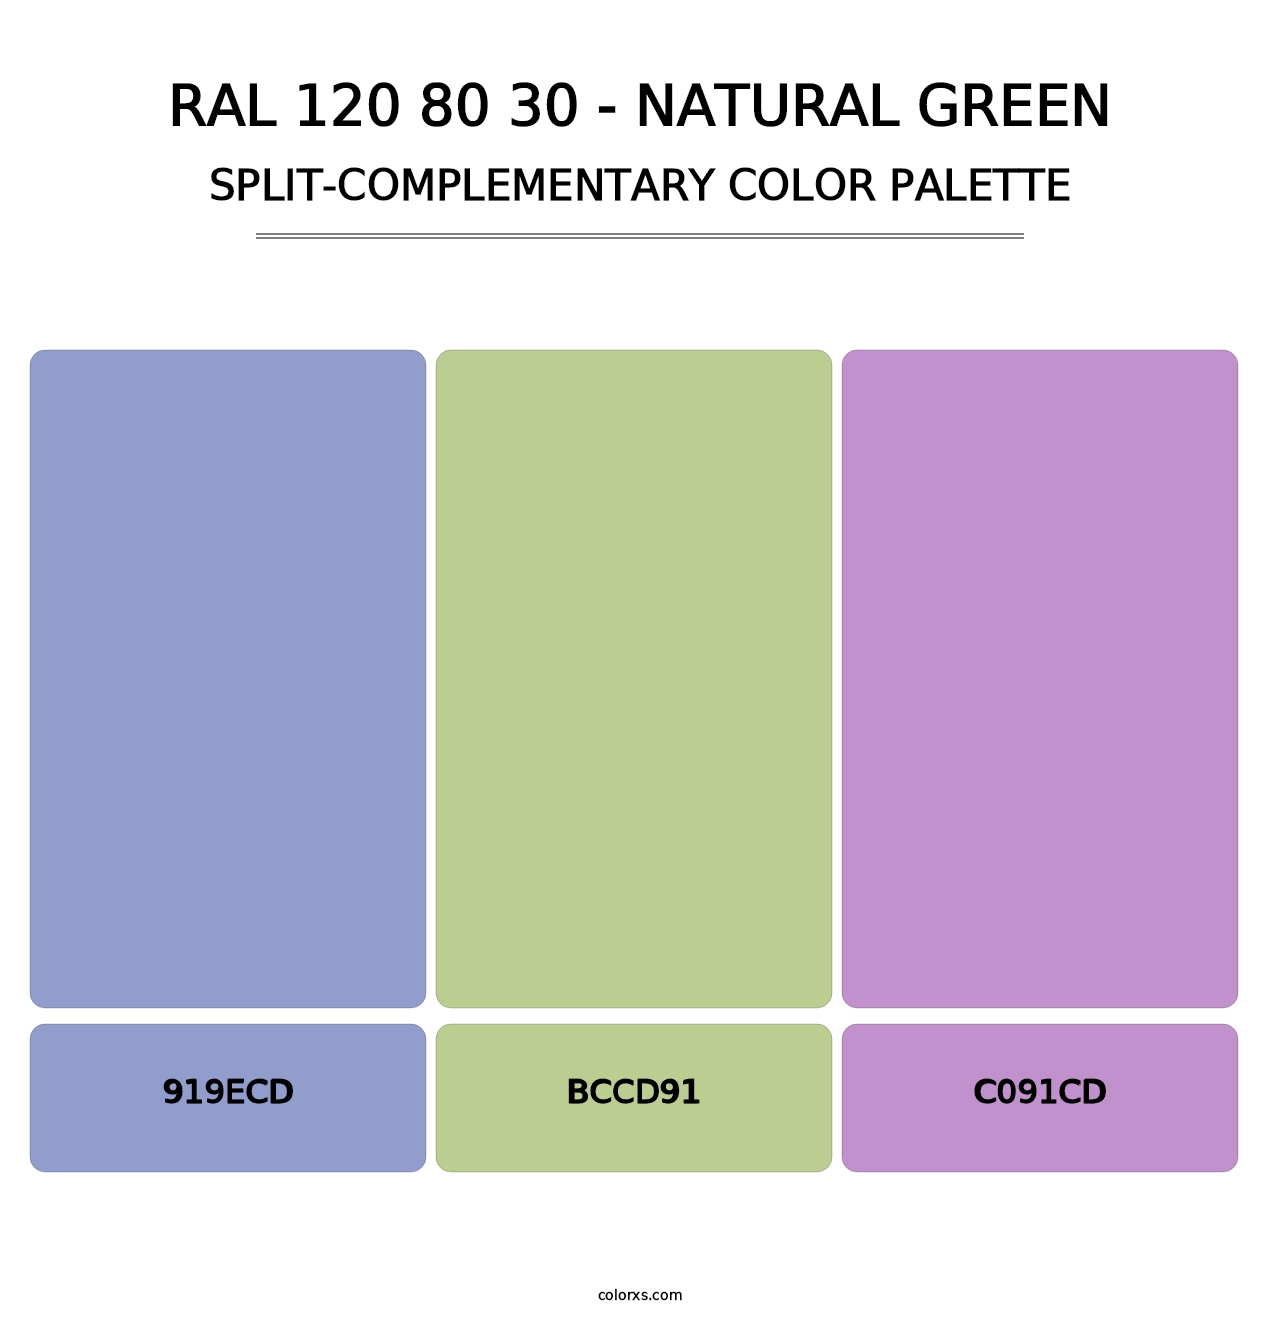 RAL 120 80 30 - Natural Green - Split-Complementary Color Palette